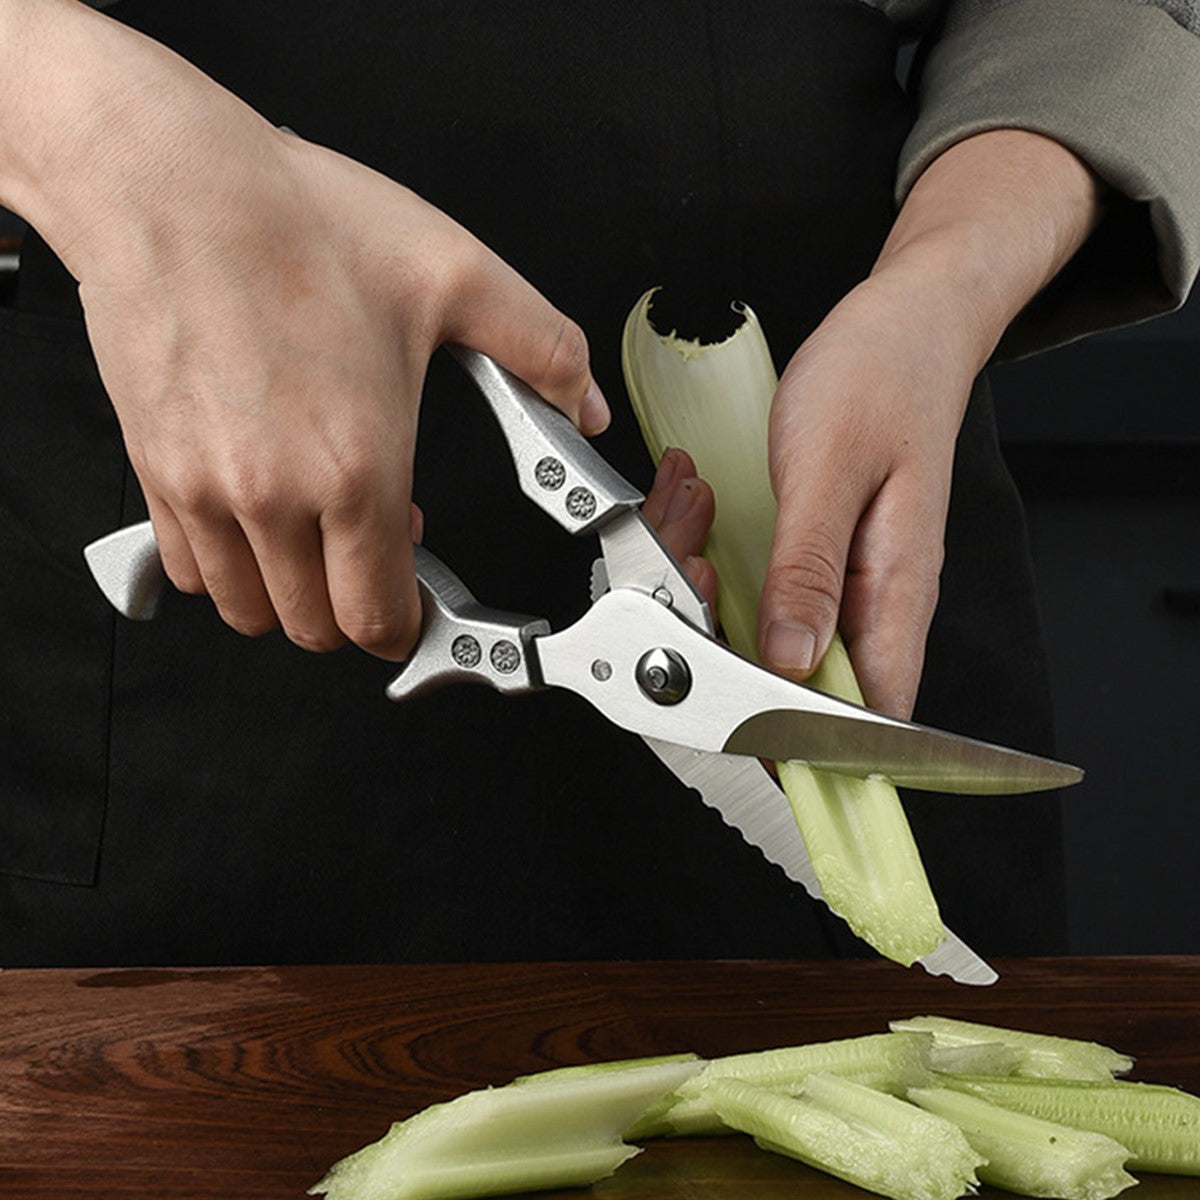 Kitchen Stainless Steel Scissors Cutting Celery Stalks With Ease